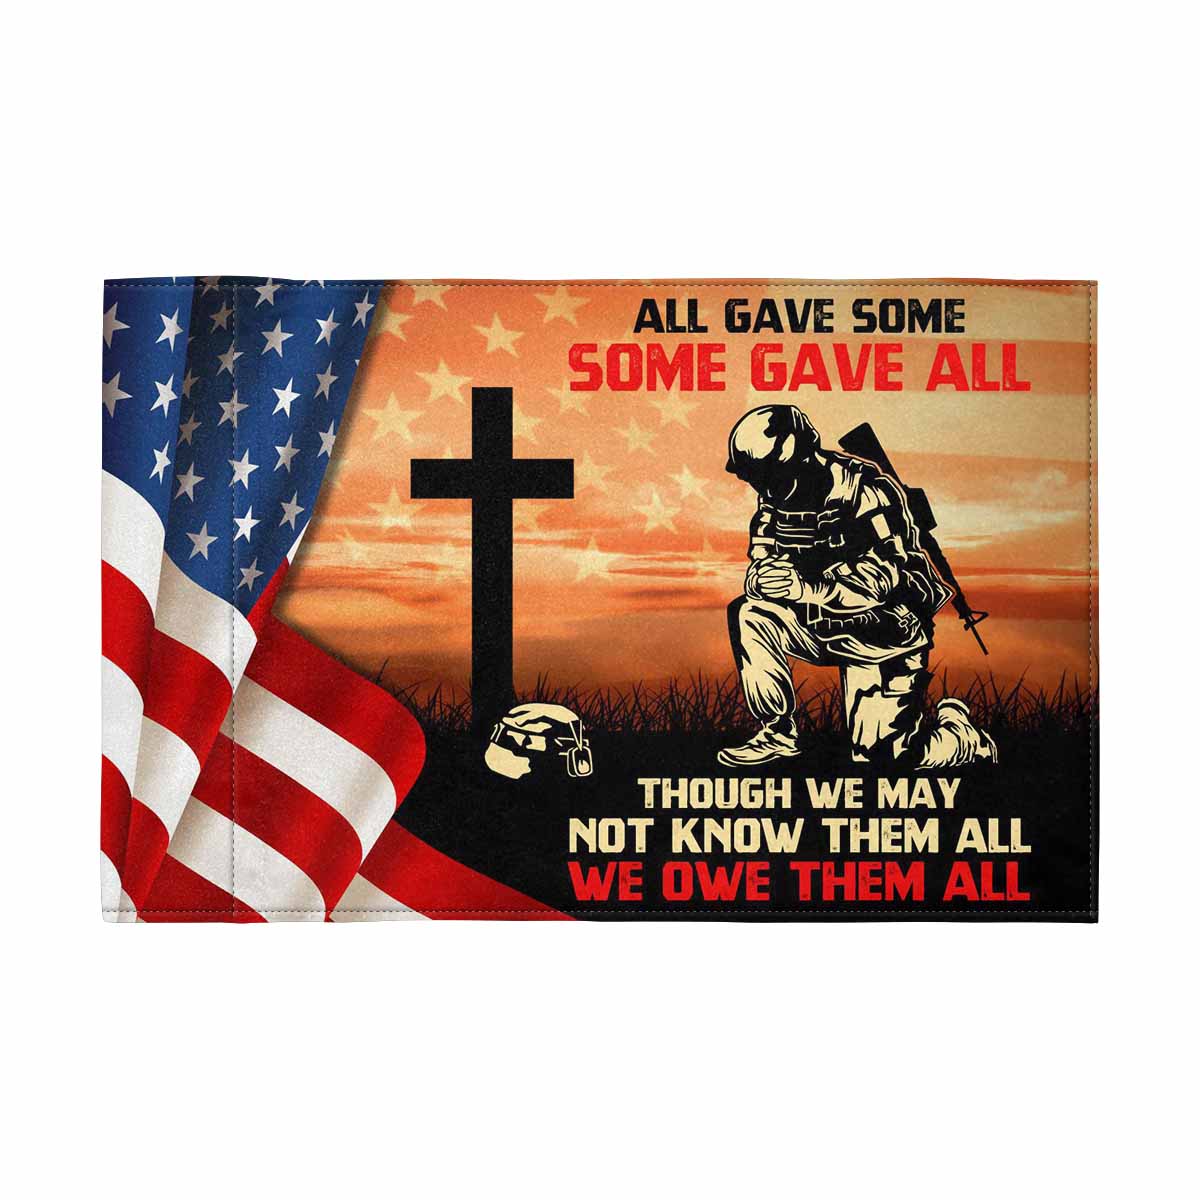 Motorcycle Flag 9_ x 6_ - ALL GAVE SOME SOME GAVE ALL THOUGH WE MAY NOT KNOW THEM ALL WE OWE THEM ALL Motorcycle Flag 9" x 6"(Each Piece With Different Printing）-Garden Flag-Veterans Nation